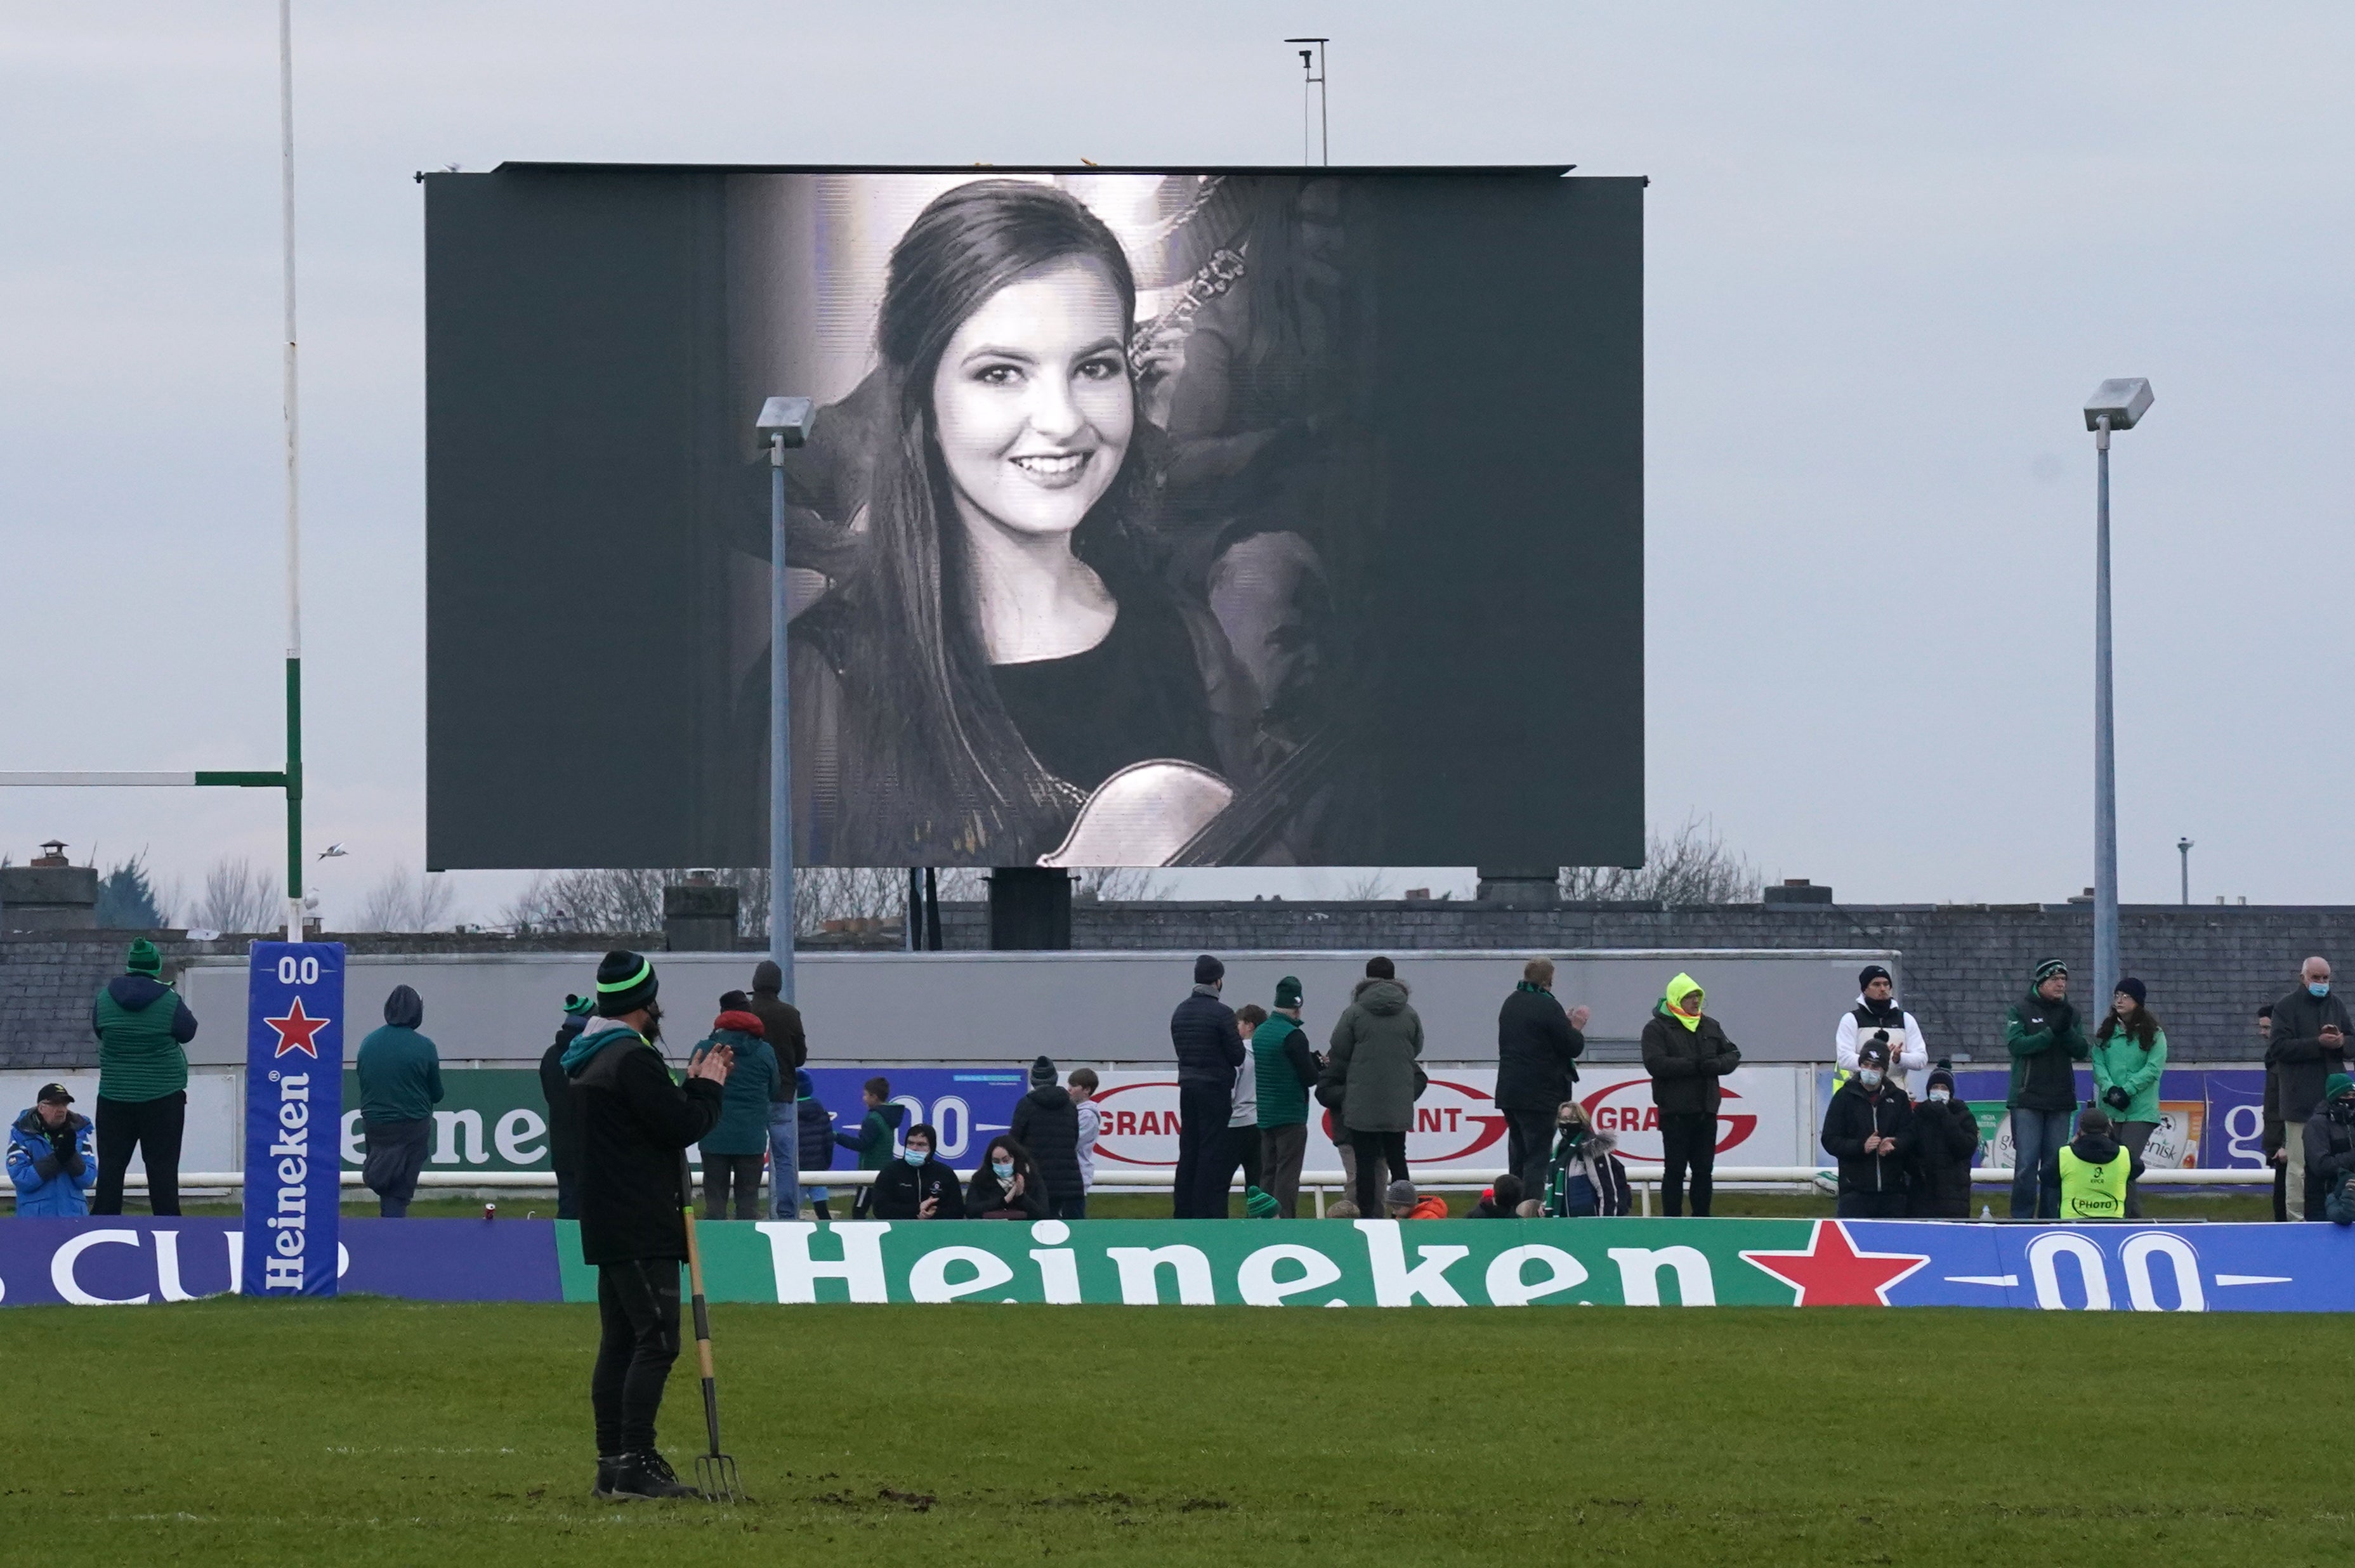 A photo of Ashling Murphy is displayed on the big screen during the Heineken Champions Cup match at The Sportsground in Galway (Brian Lawless/PA)